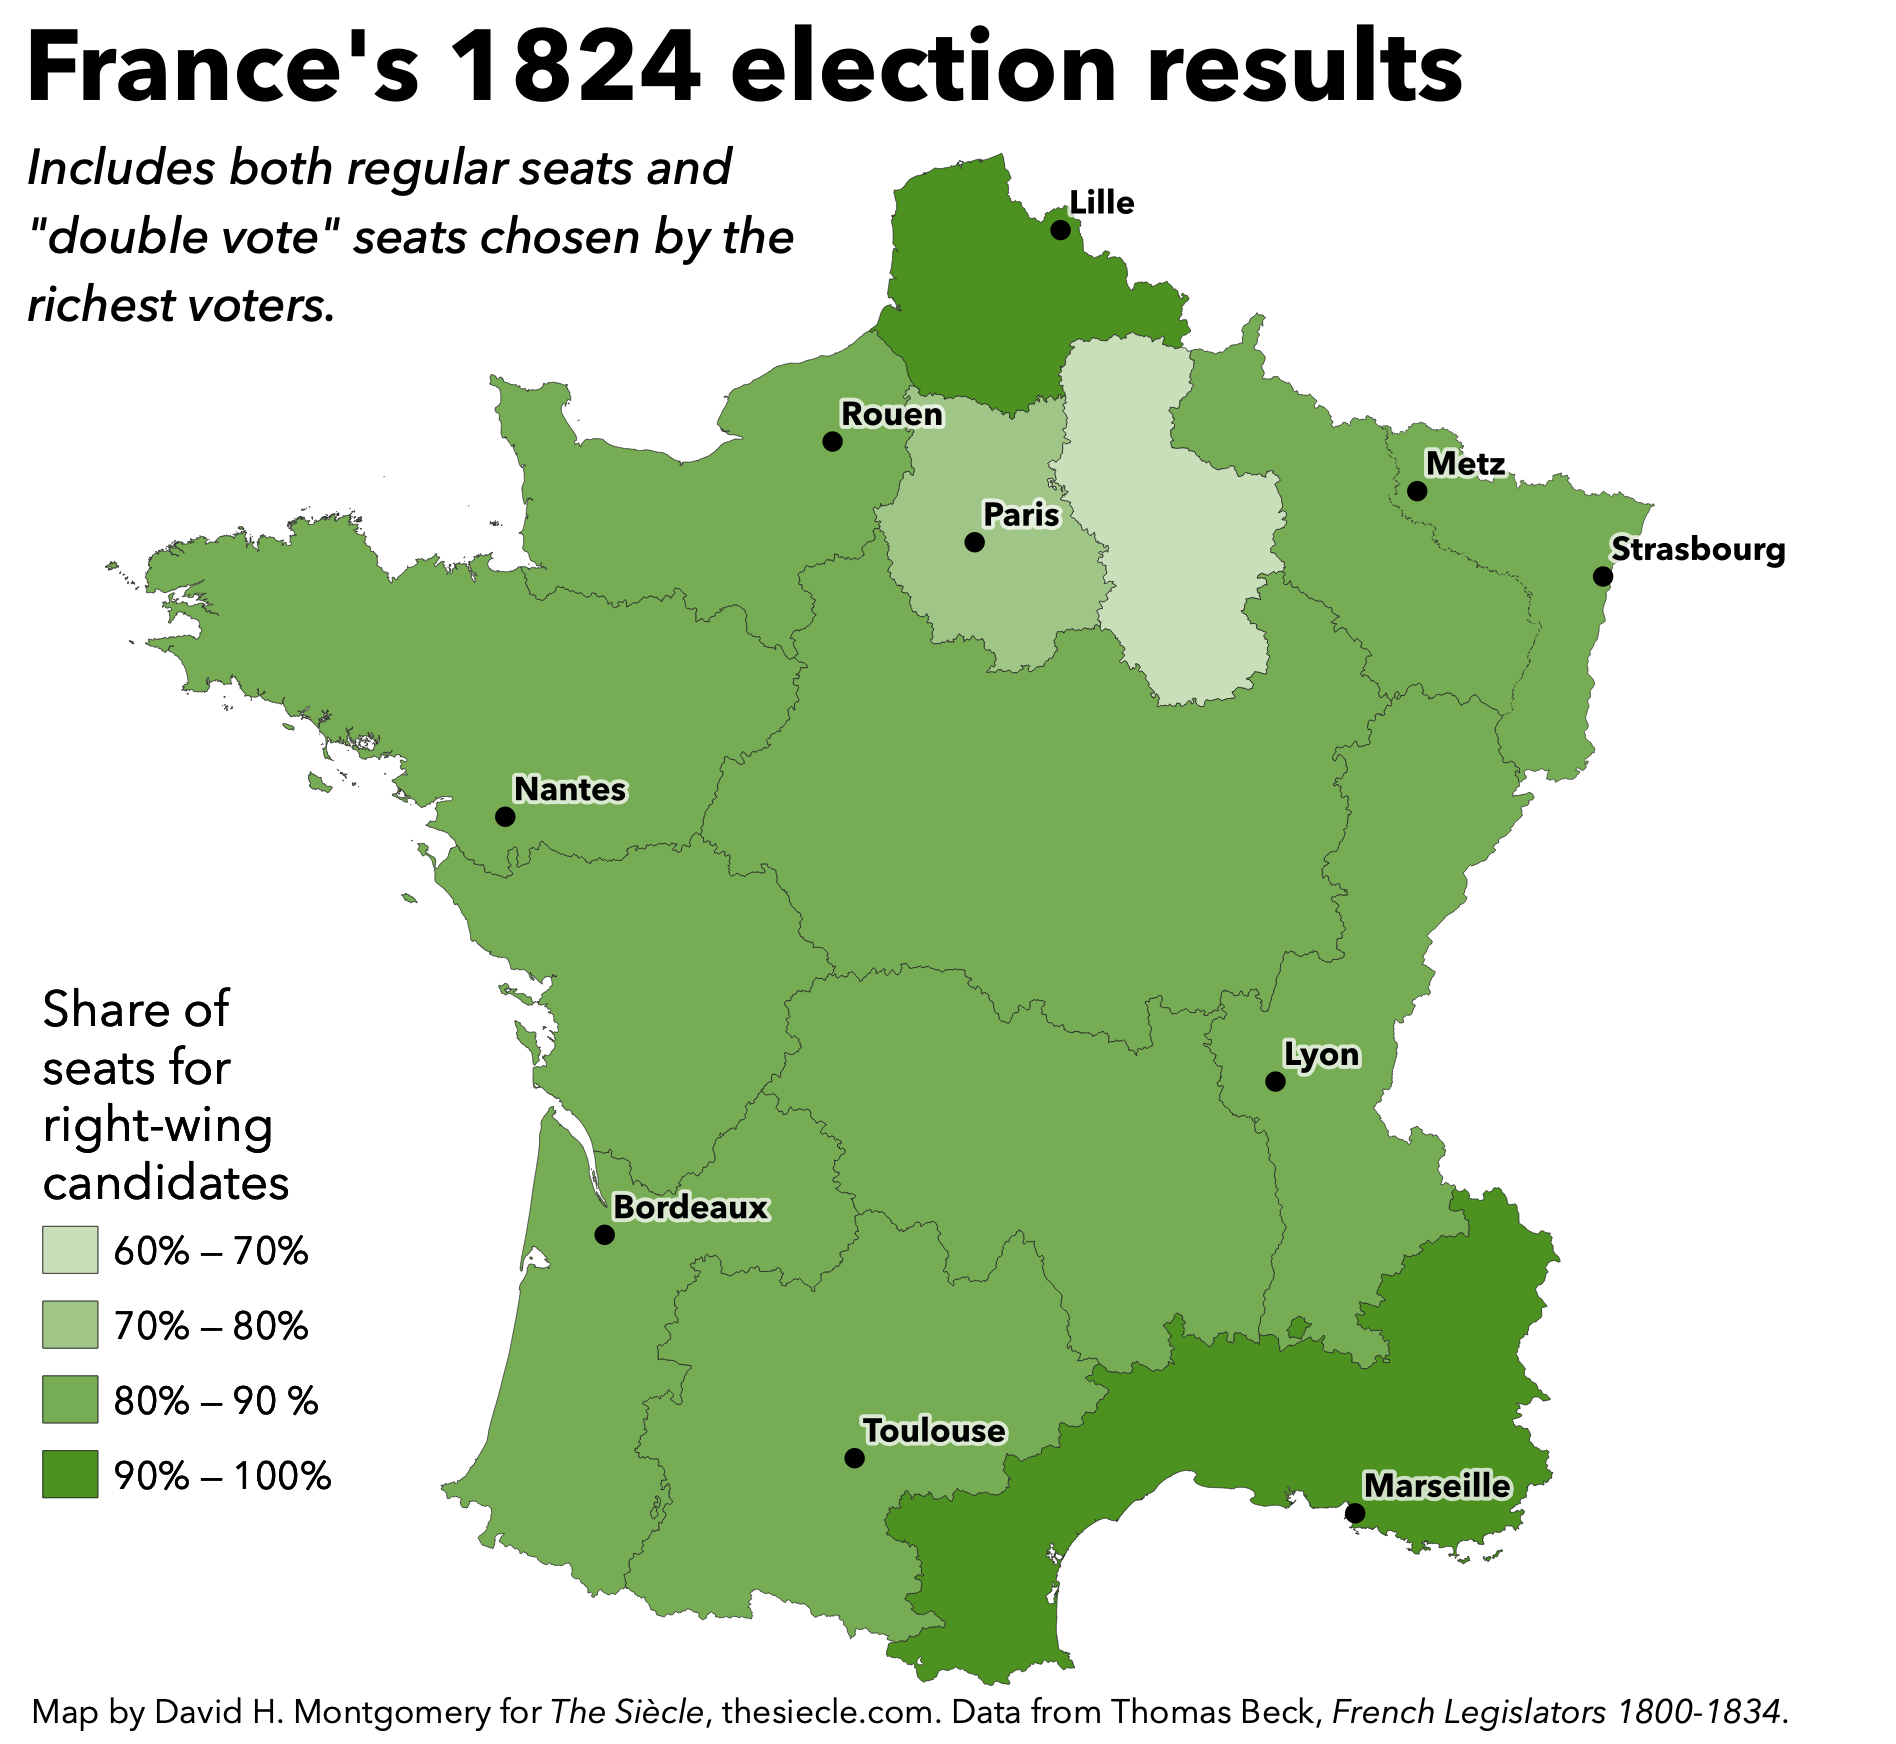 A map of the results of the 1824 French legislative elections